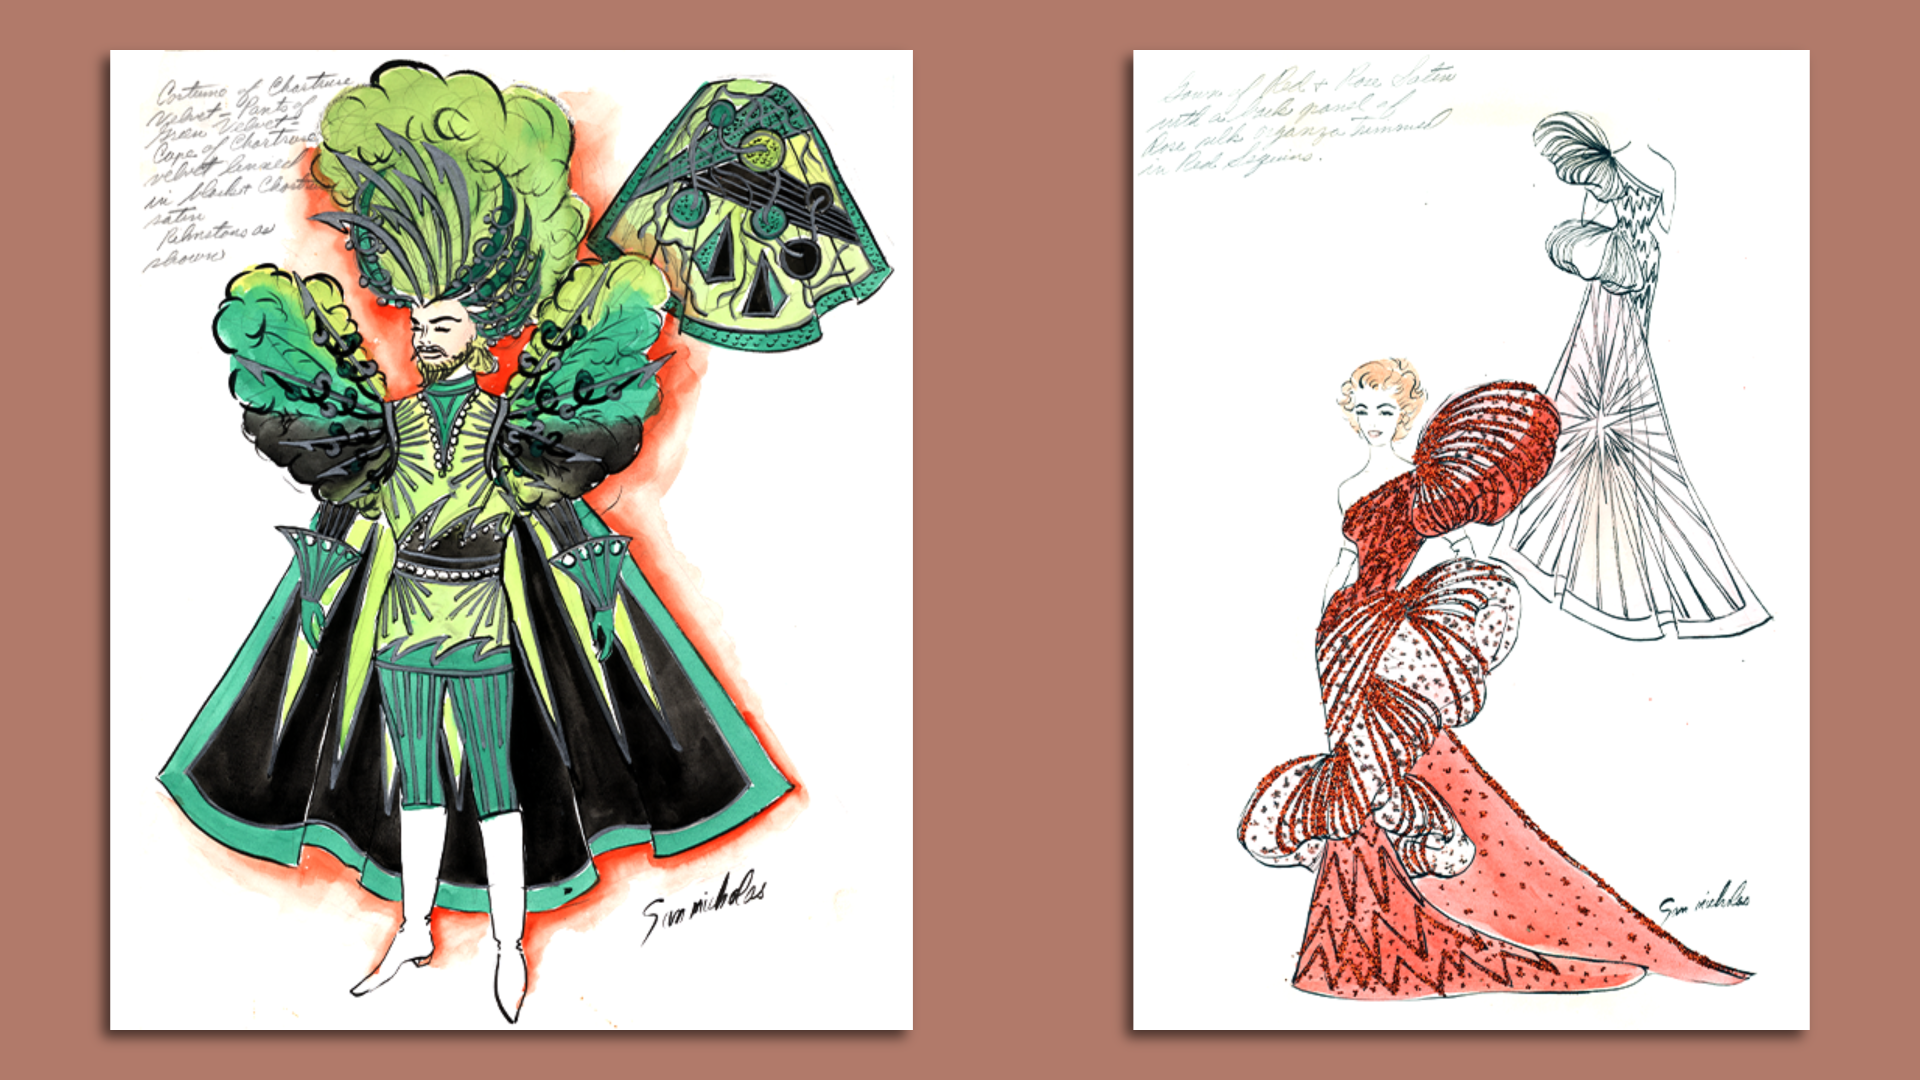 Watercolors by San Nicholas show a pair of Carnival costume designs, side by side. On the left is a man's design, with a green plumed hat and cape, and on the right is a woman's gown, with red feathers and a long train.